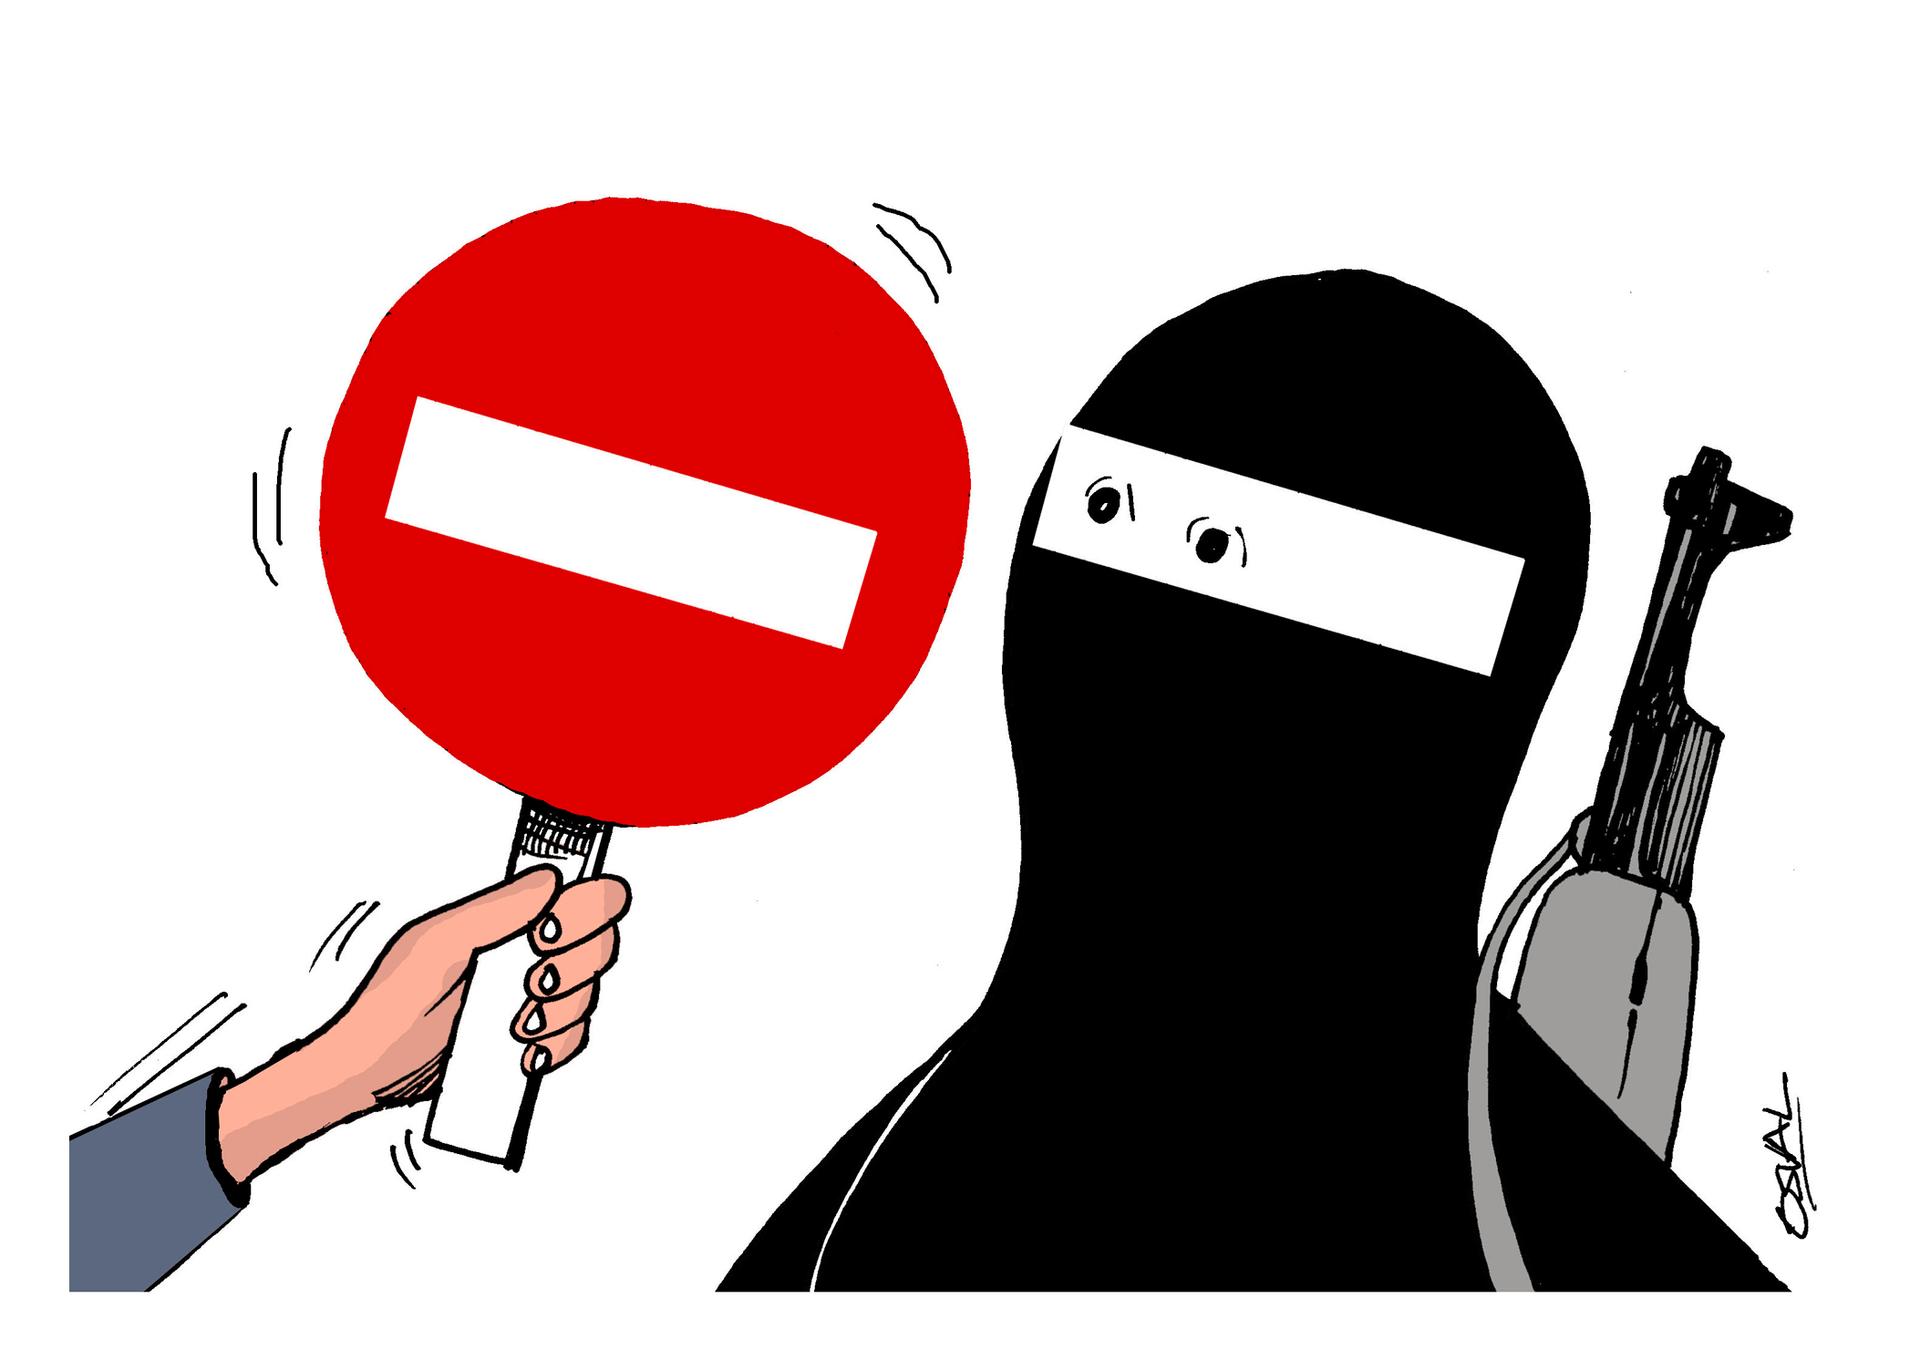 'Stop ISIS', a cartoon submission from Cuba.